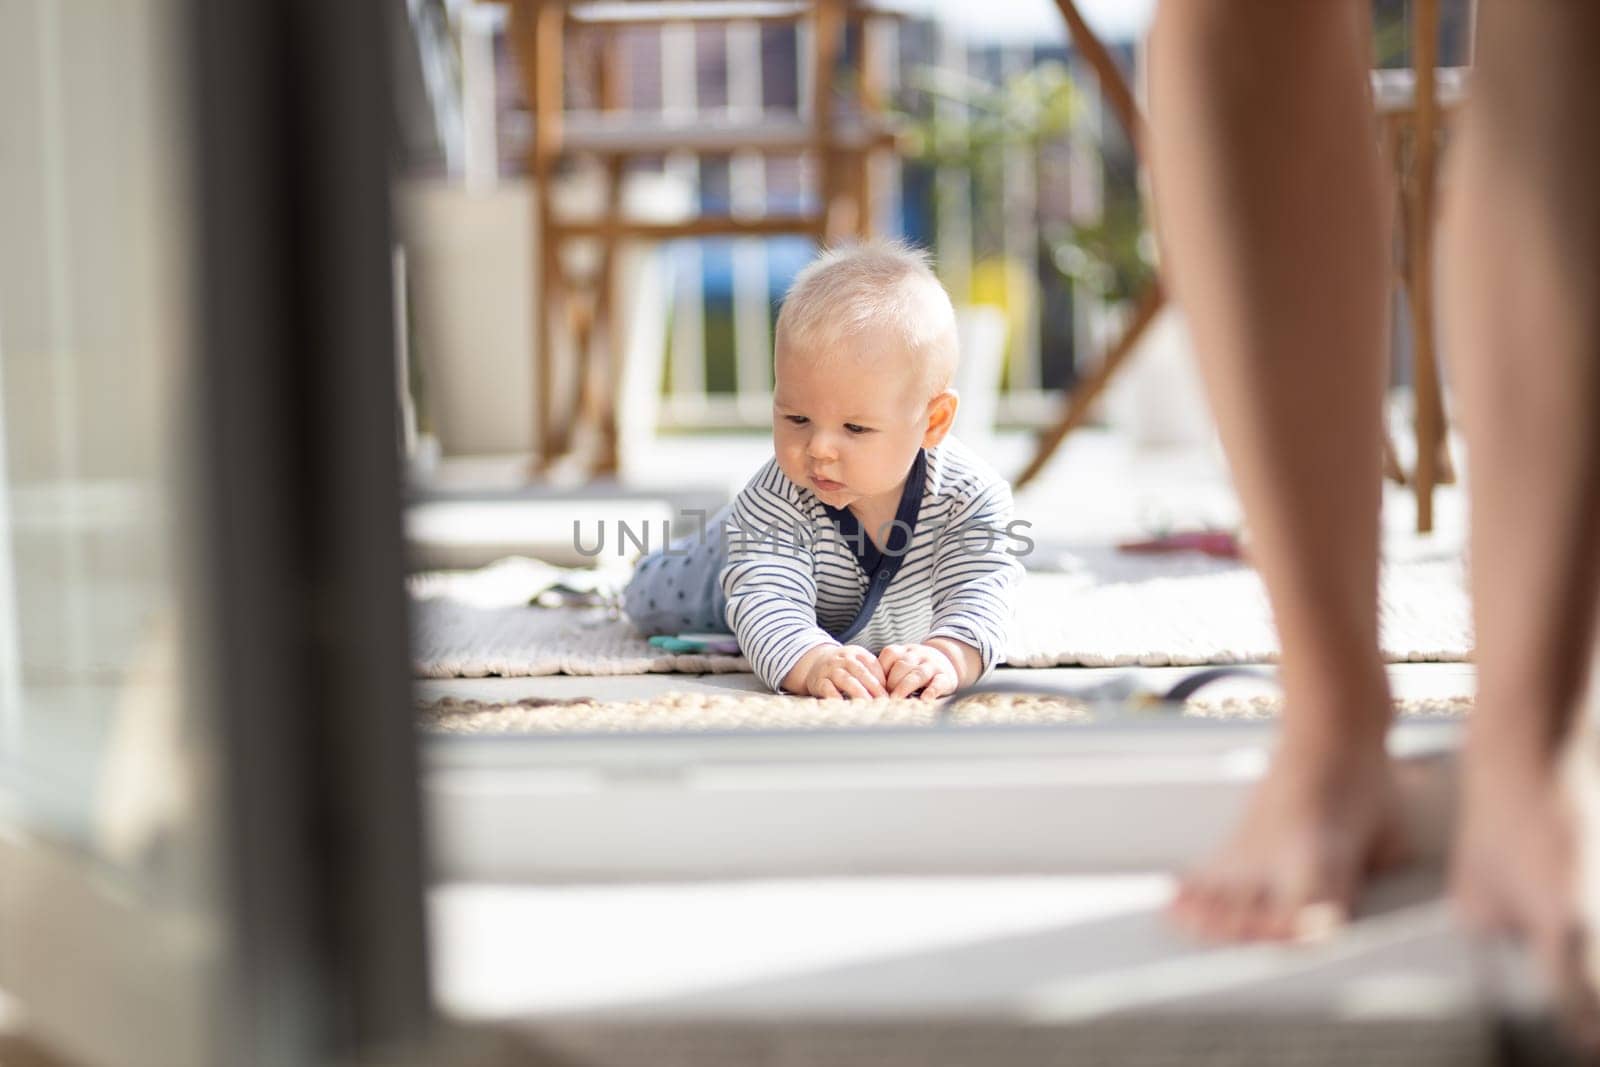 Cute little infant baby boy playing with toys outdoors at the patio in summer being supervised by her mother seen in the background. by kasto